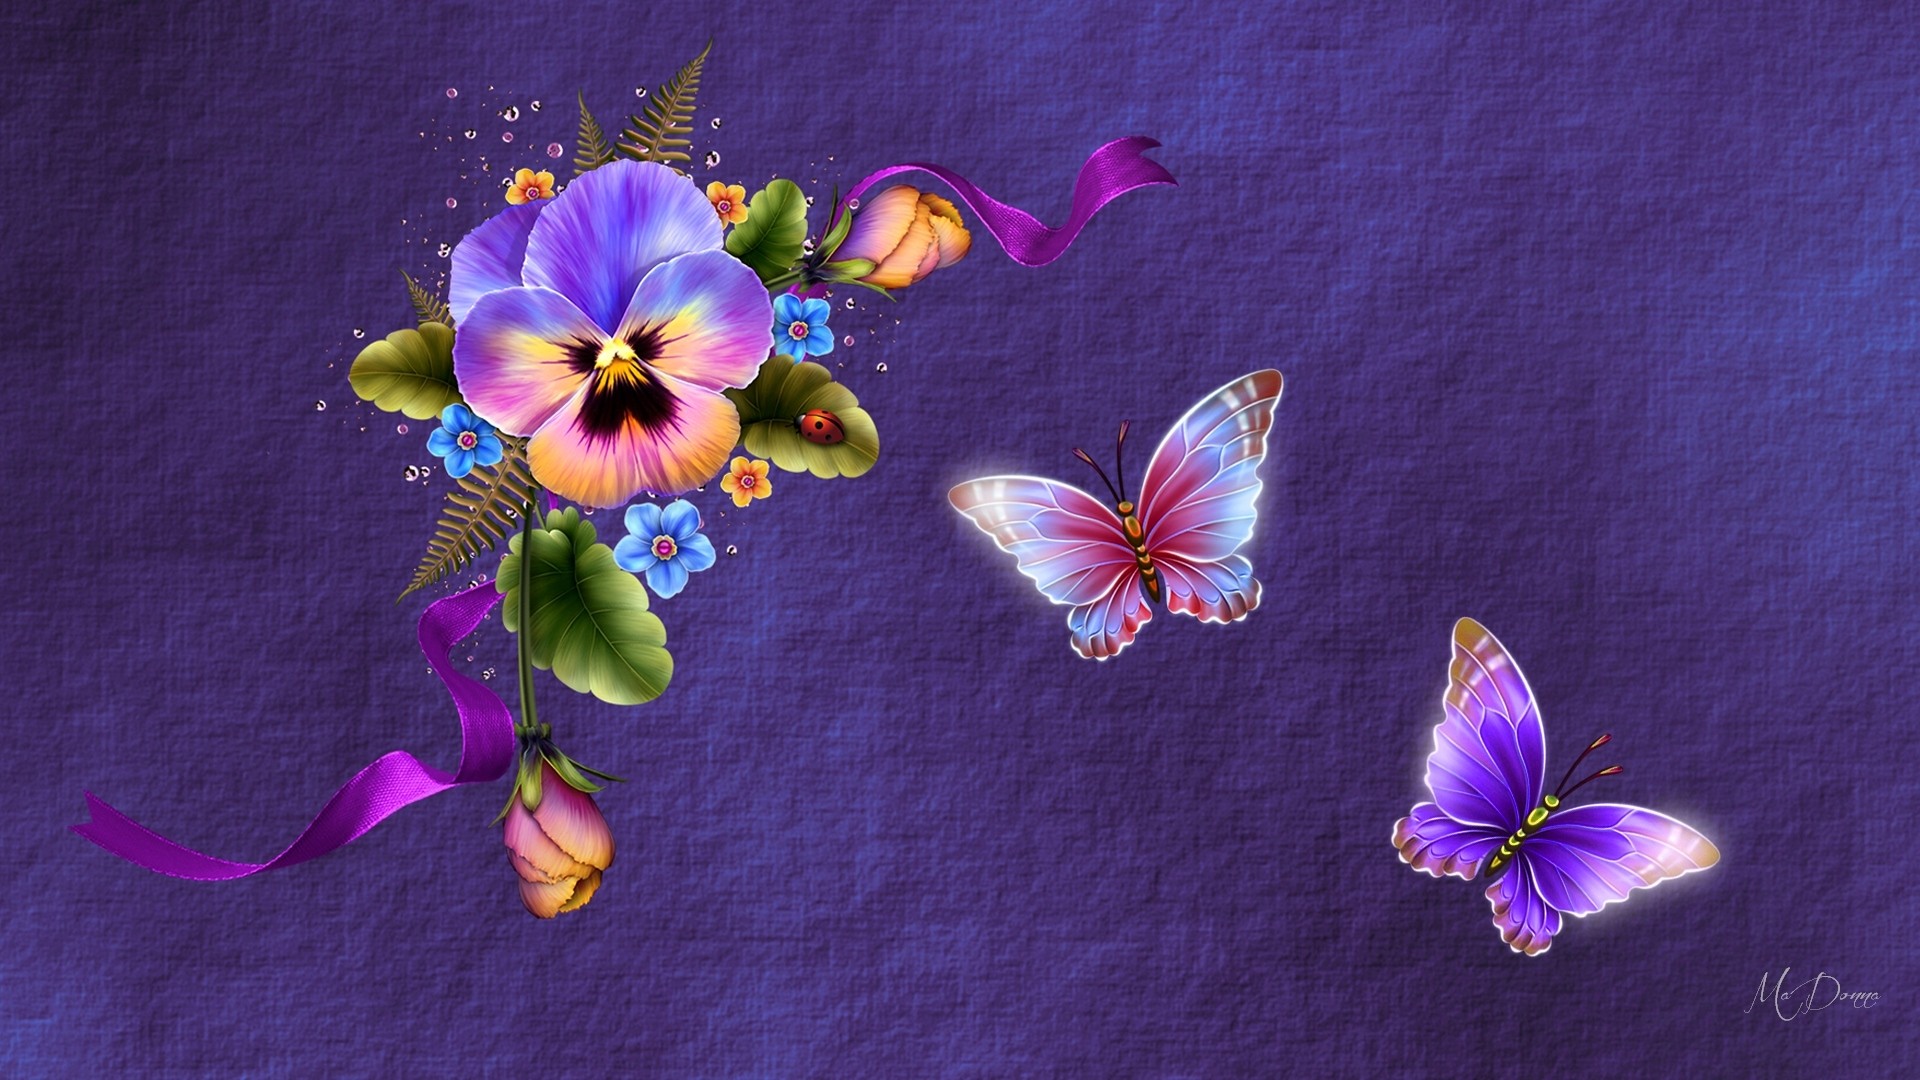 Pansies and Butterflies by MaDonna